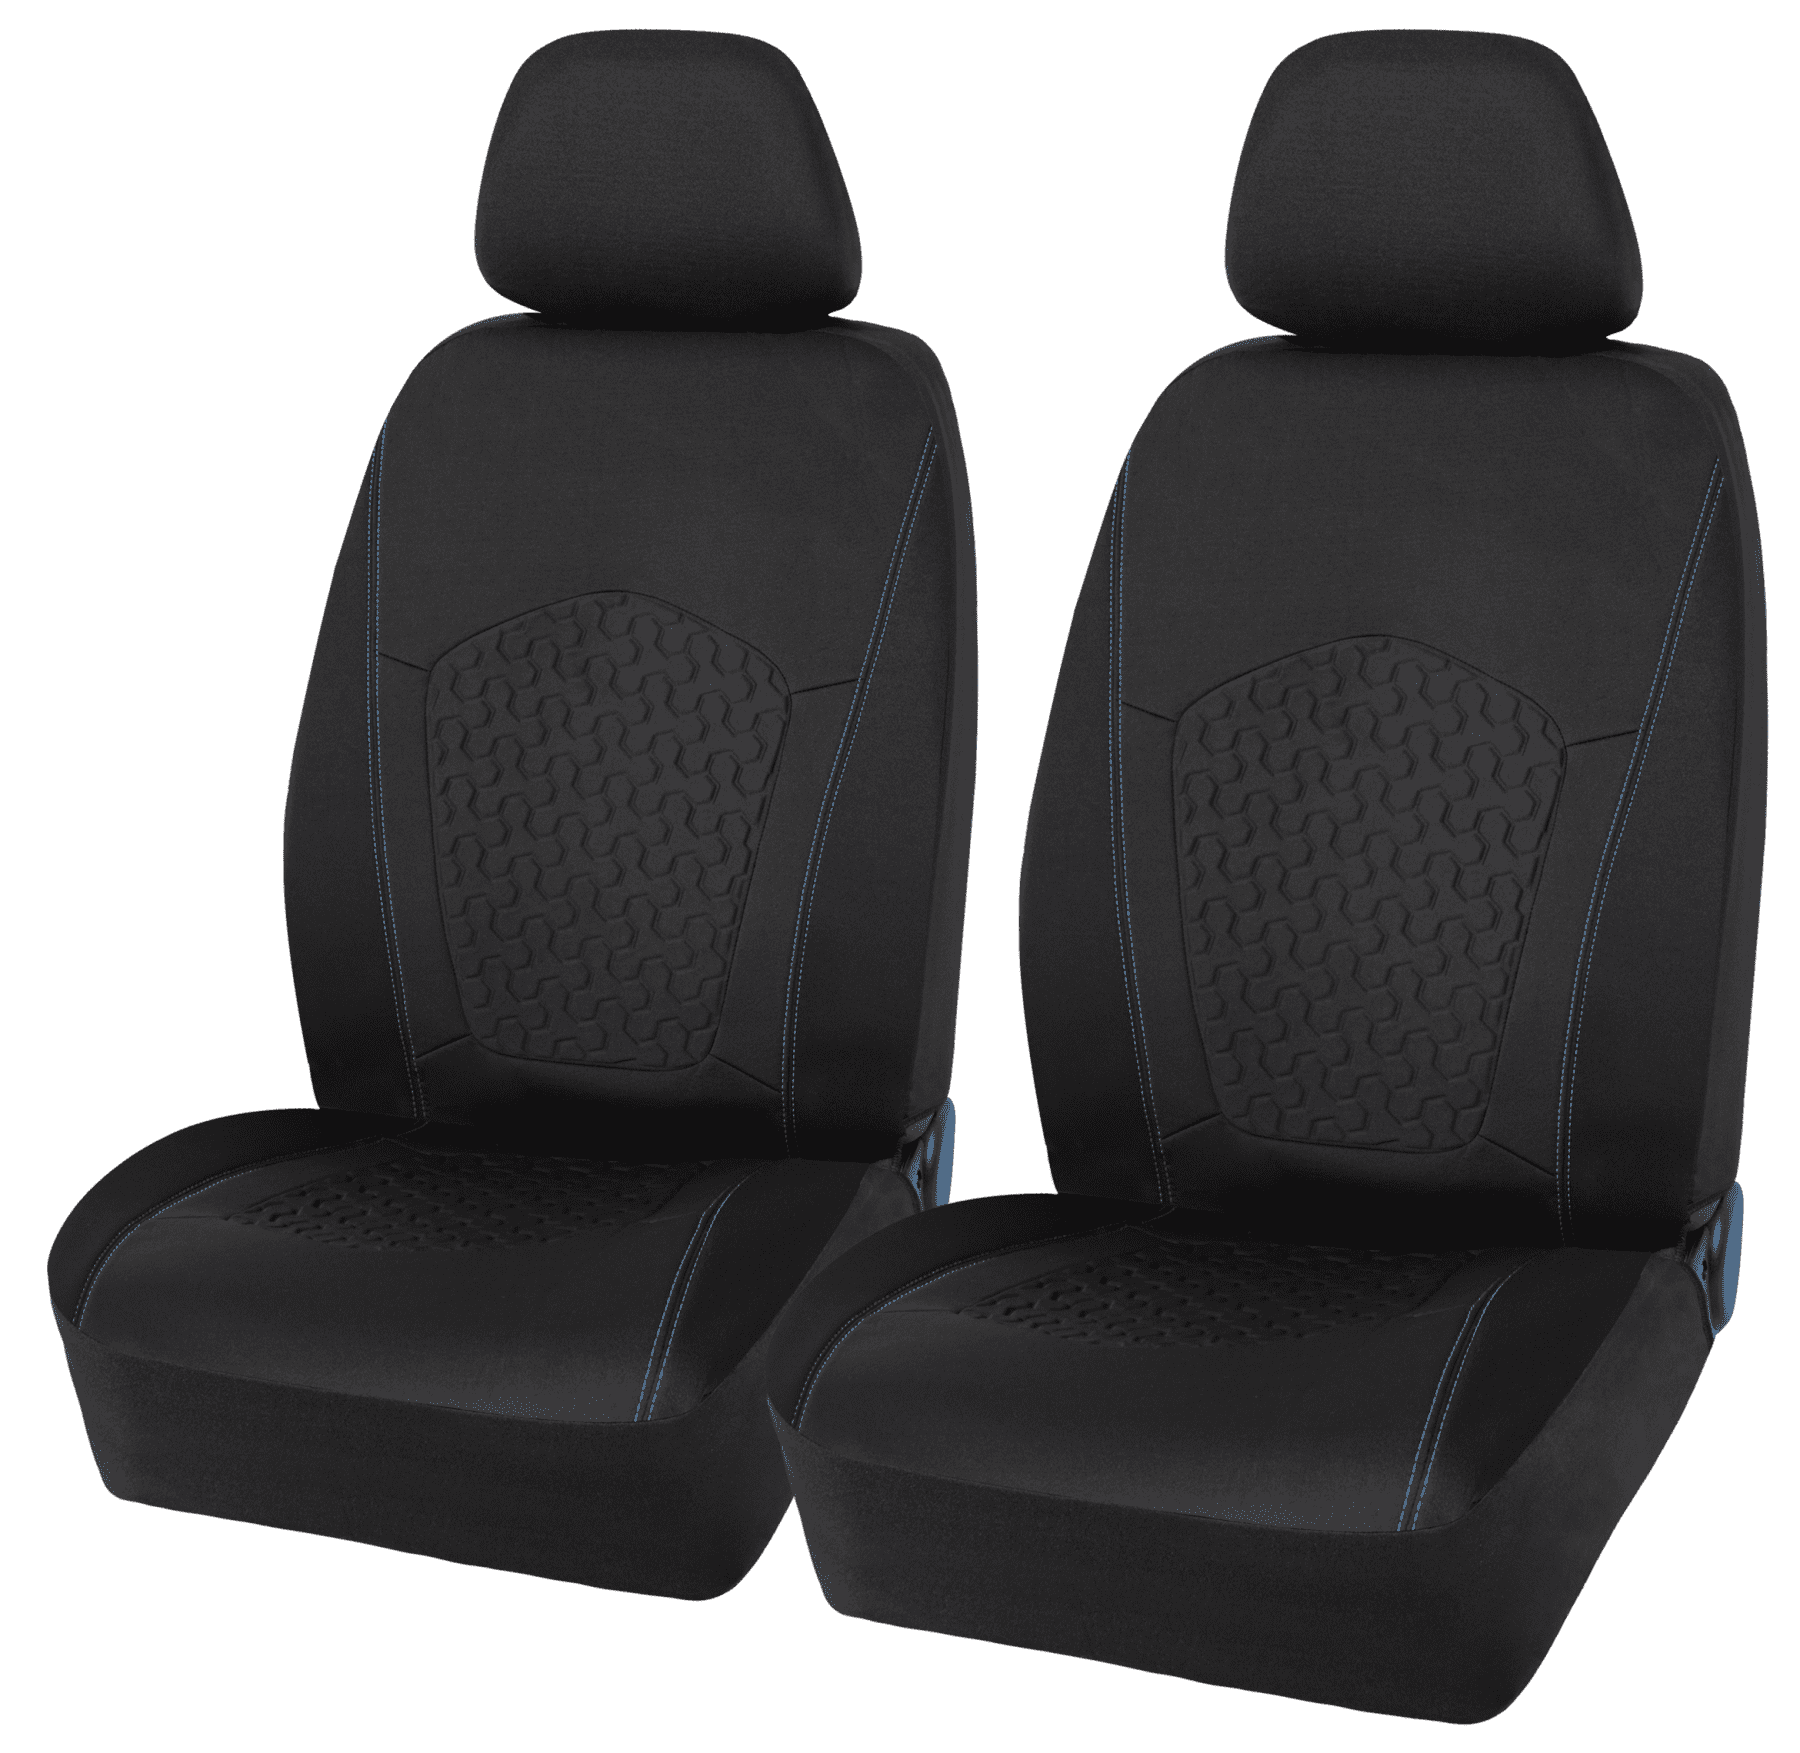 Auto Drive Universal Fit Low Back Gel Cooling Polyester Seat Cover - Black - 2 Piece 2010SC12